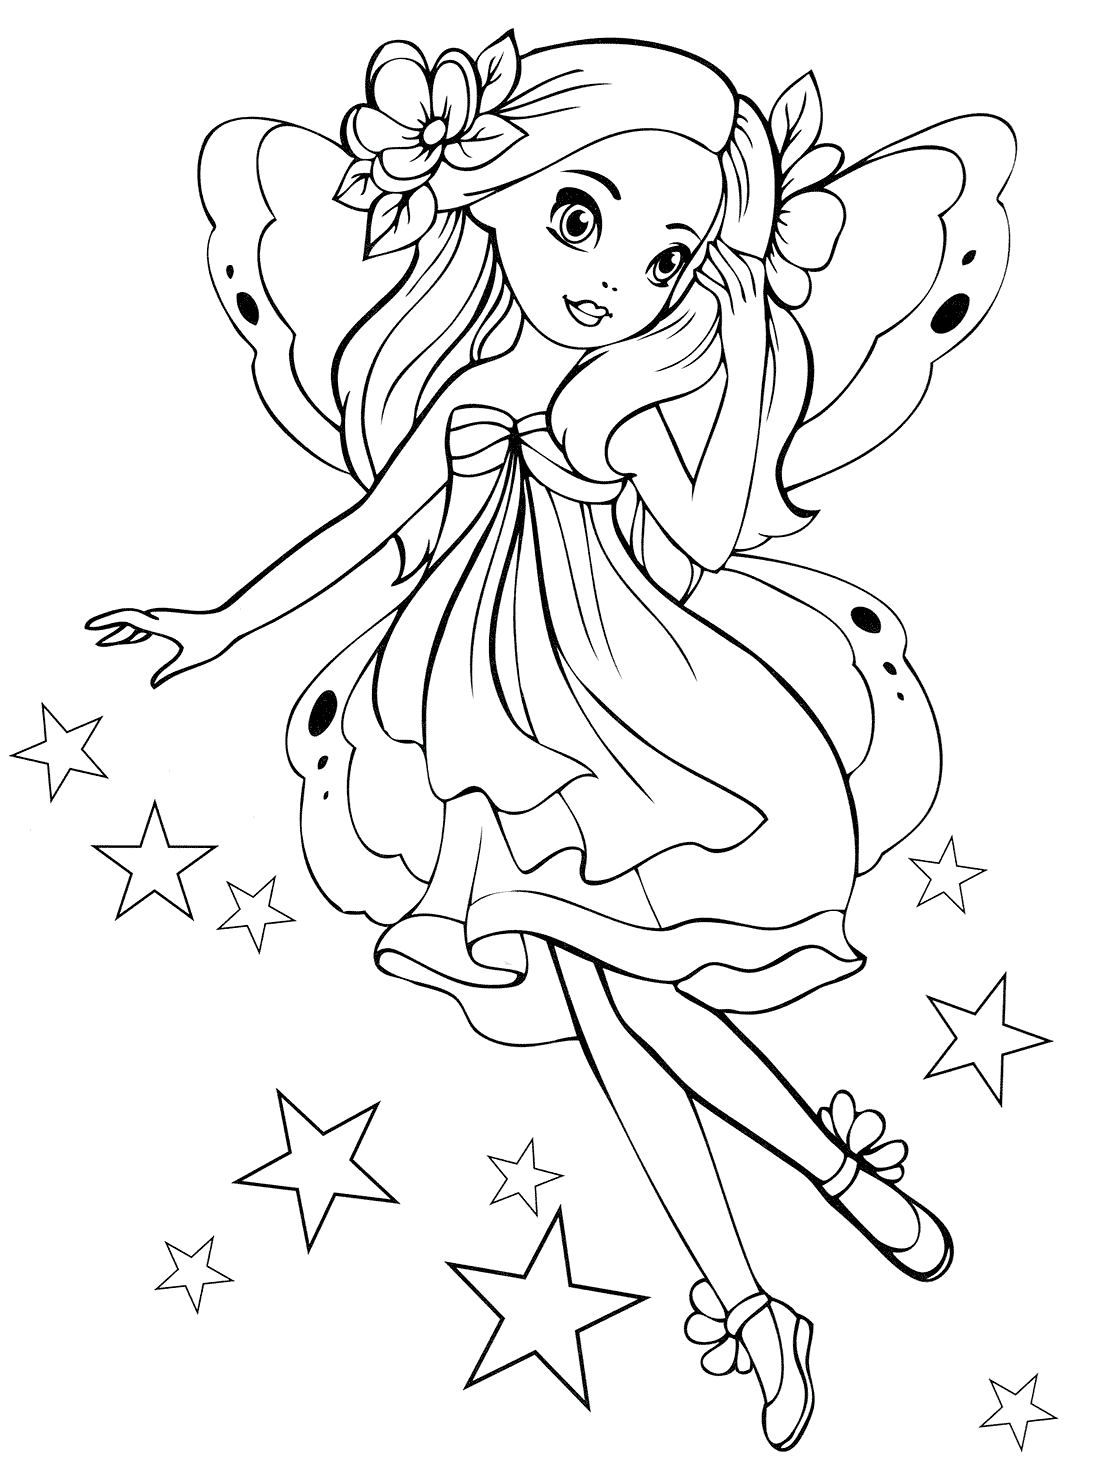 Download Coloring pages for 8,9,10-year old girls to download and print for free